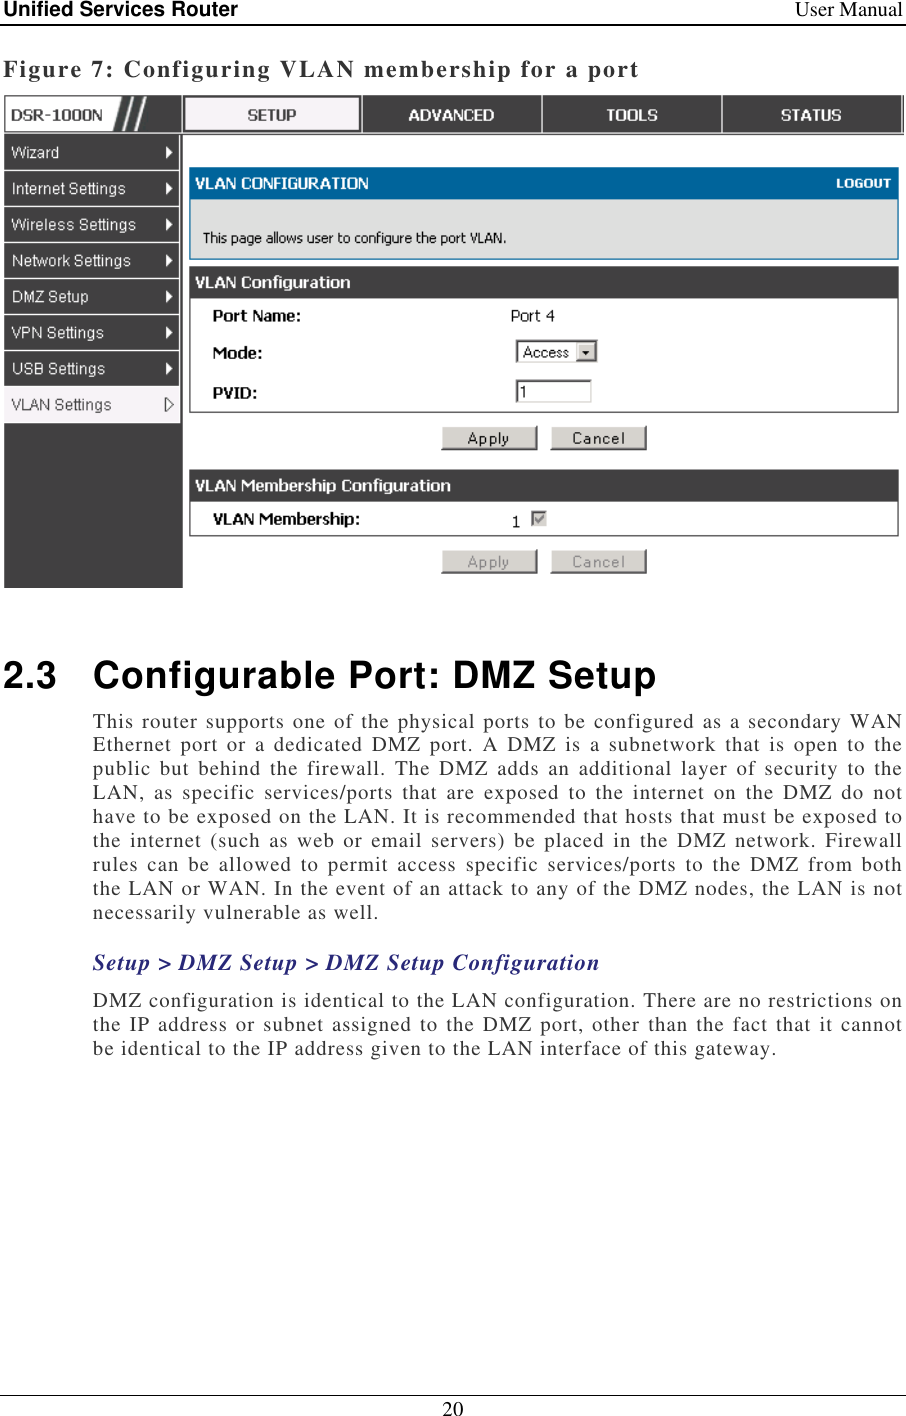 Unified Services Router    User Manual 20  Figure 7: Configuring VLAN membership for a port   2.3  Configurable Port: DMZ Setup This router supports one  of the physical ports to be configured as a secondary WAN Ethernet  port  or  a  dedicated  DMZ  port.  A  DMZ  is  a  subnetwork  that  is  open  to  the public  but  behind  the  firewall.  The  DMZ  adds  an  additional  layer  of  security  to  the LAN,  as  specific  services/ports  that  are  exposed  to  the  internet  on  the  DMZ  do  not have to be exposed on the LAN. It is recommended that hosts that must be exposed to the  internet (such as  web  or  email  servers)  be  placed  in the  DMZ  network.  Firewall rules  can  be  allowed  to  permit  access  specific  services/ports  to  the  DMZ  from  both the LAN or WAN. In the event of an attack to any of the DMZ nodes, the LAN is not necessarily vulnerable as well.  Setup &gt; DMZ Setup &gt; DMZ Setup Configuration DMZ configuration is identical to the LAN configuration. There are no restrictions on the IP address or subnet assigned to the DMZ  port, other than the  fact that  it cannot be identical to the IP address given to the LAN interface of this gateway.  